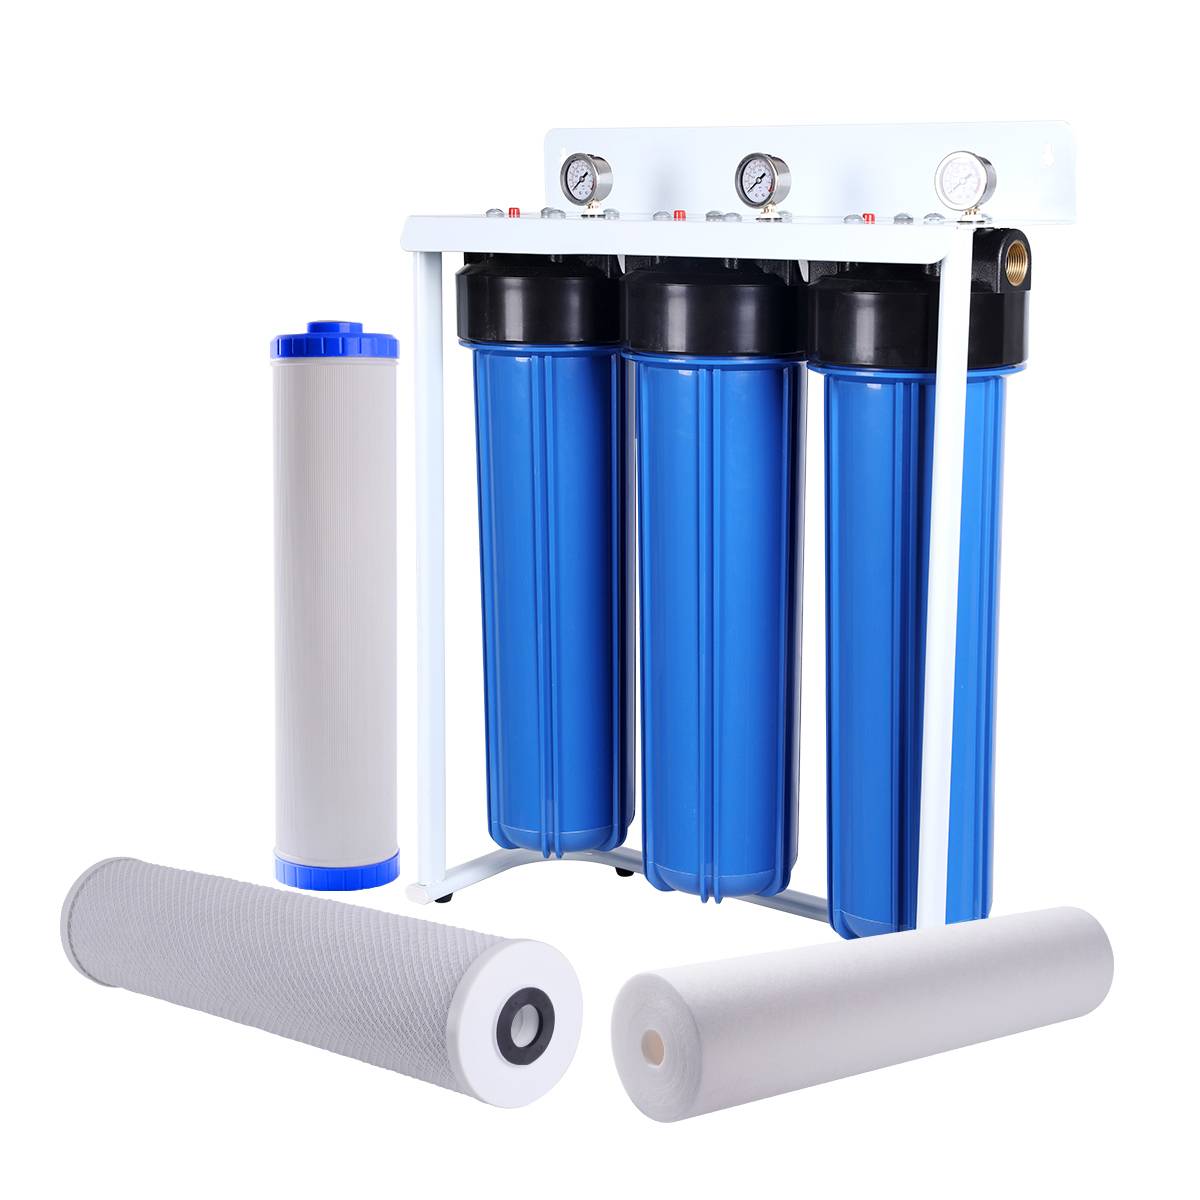 Do You Know Whole-House Water Filtration System?